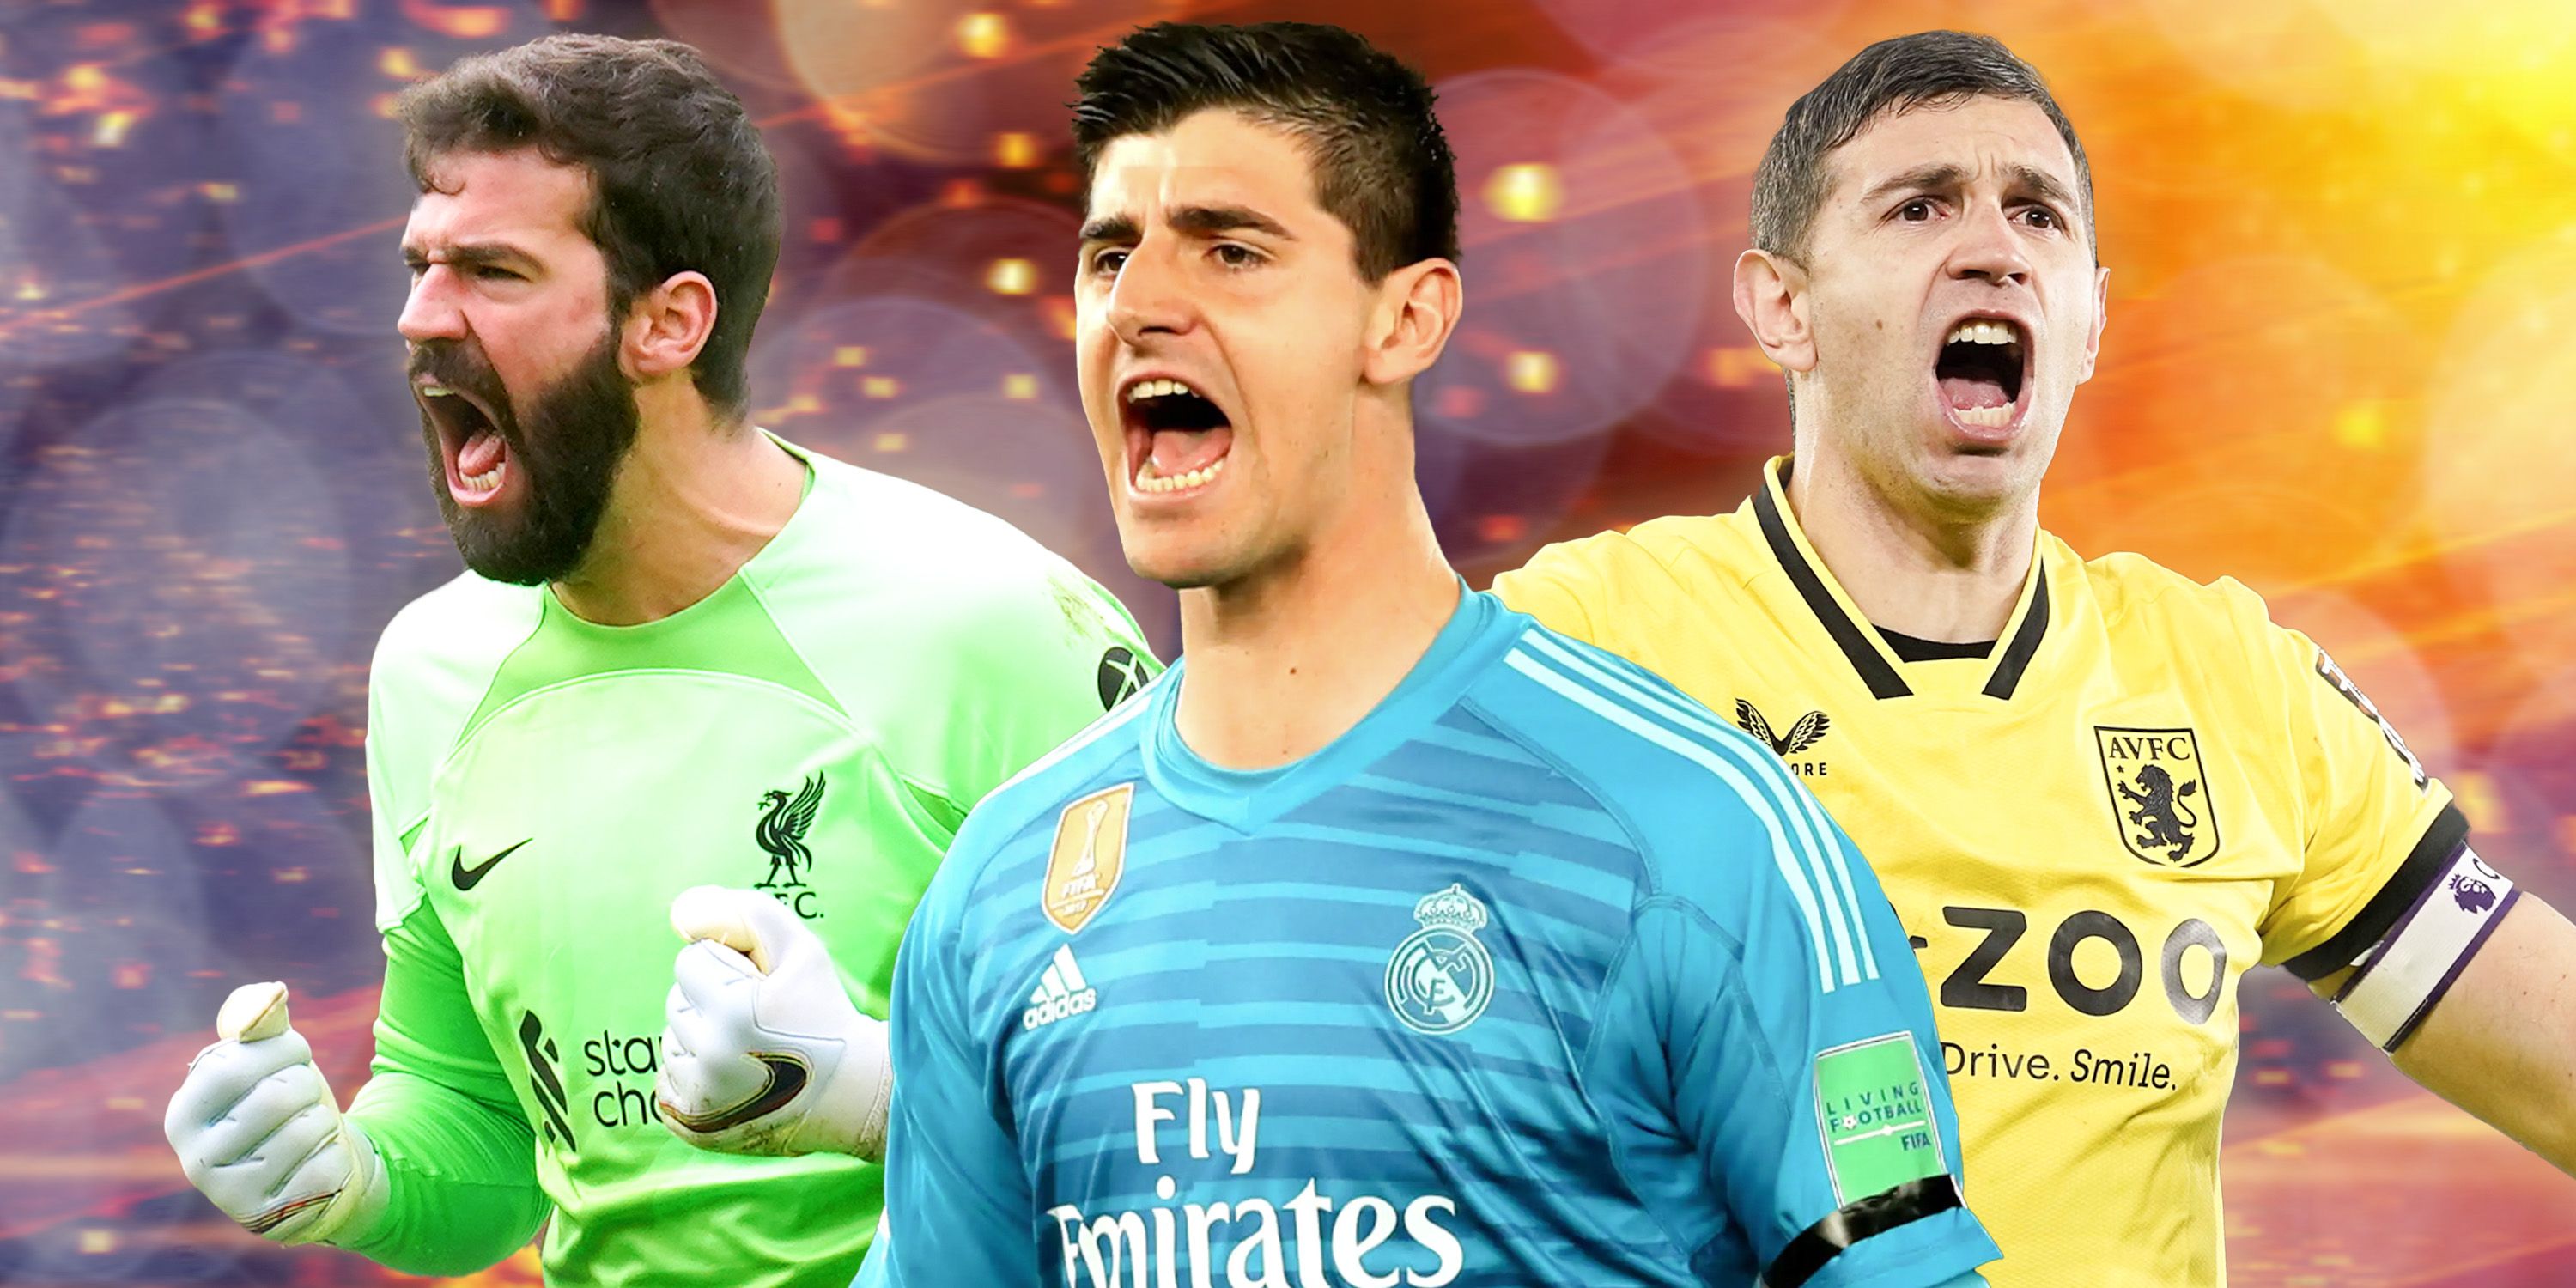 Collage featuring Alisson Becker, Thiabut Courtois and Emiliano Martinez.